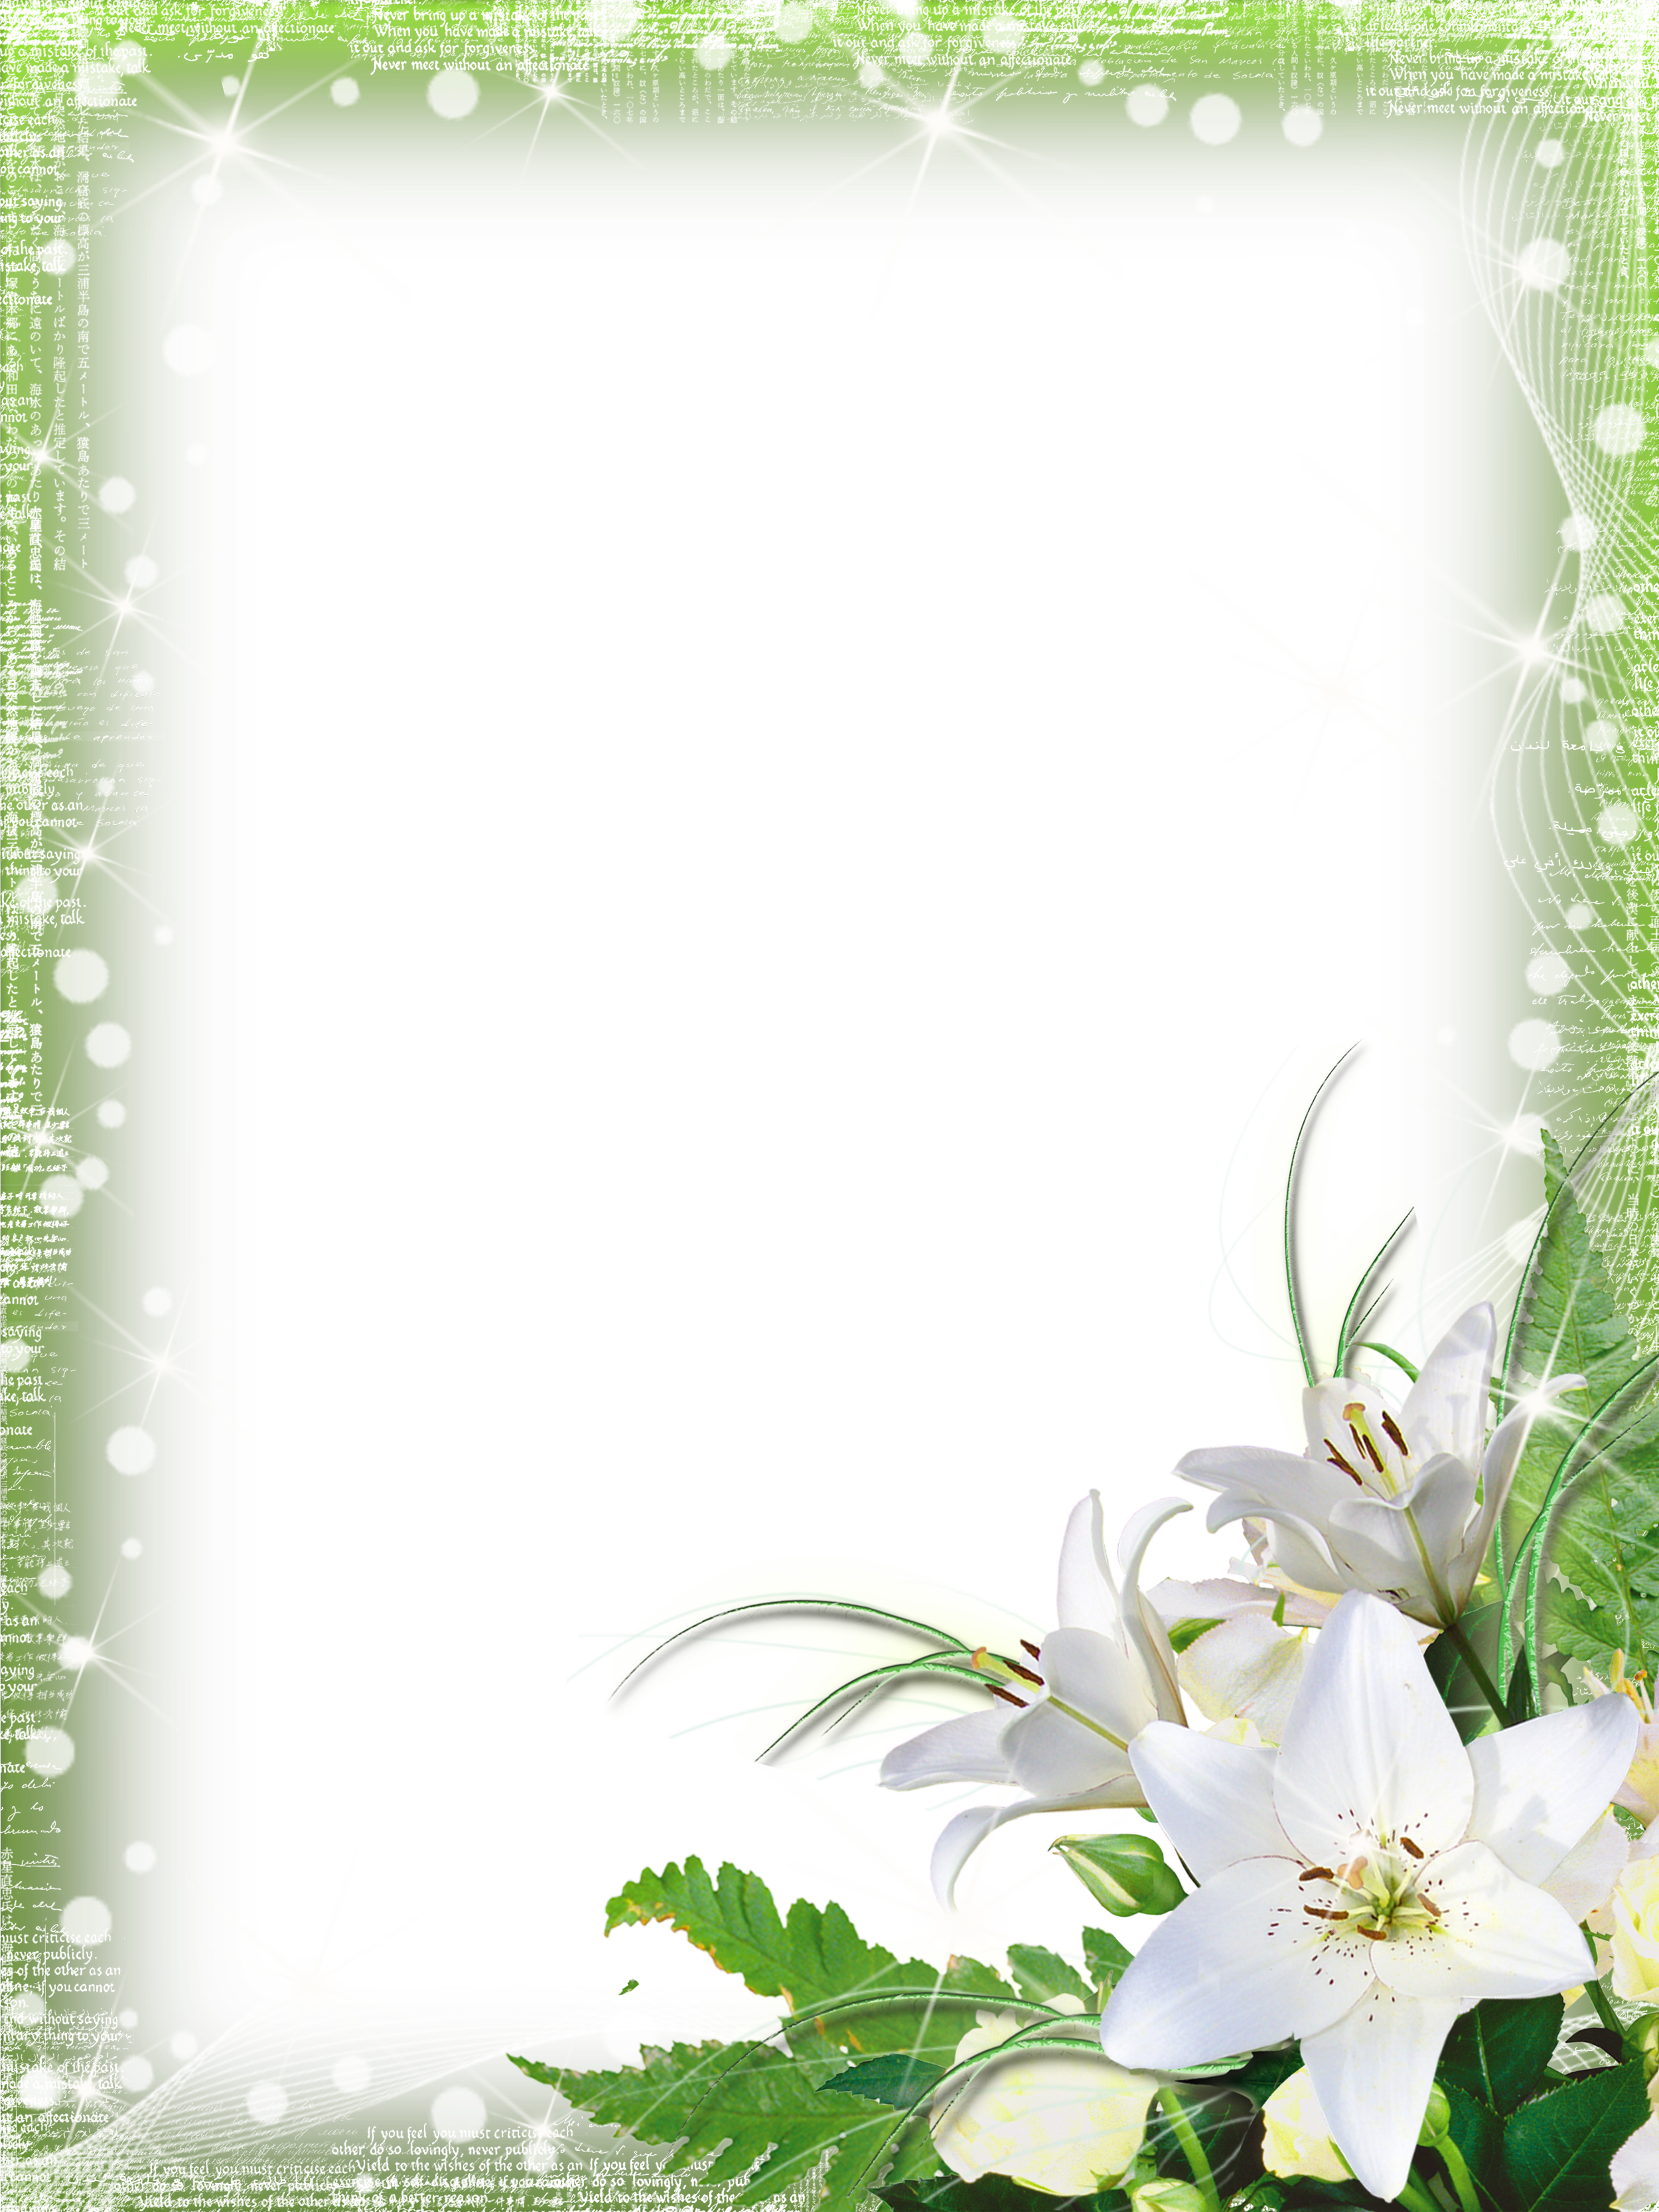 Green png photo with. Clipart frame woodland